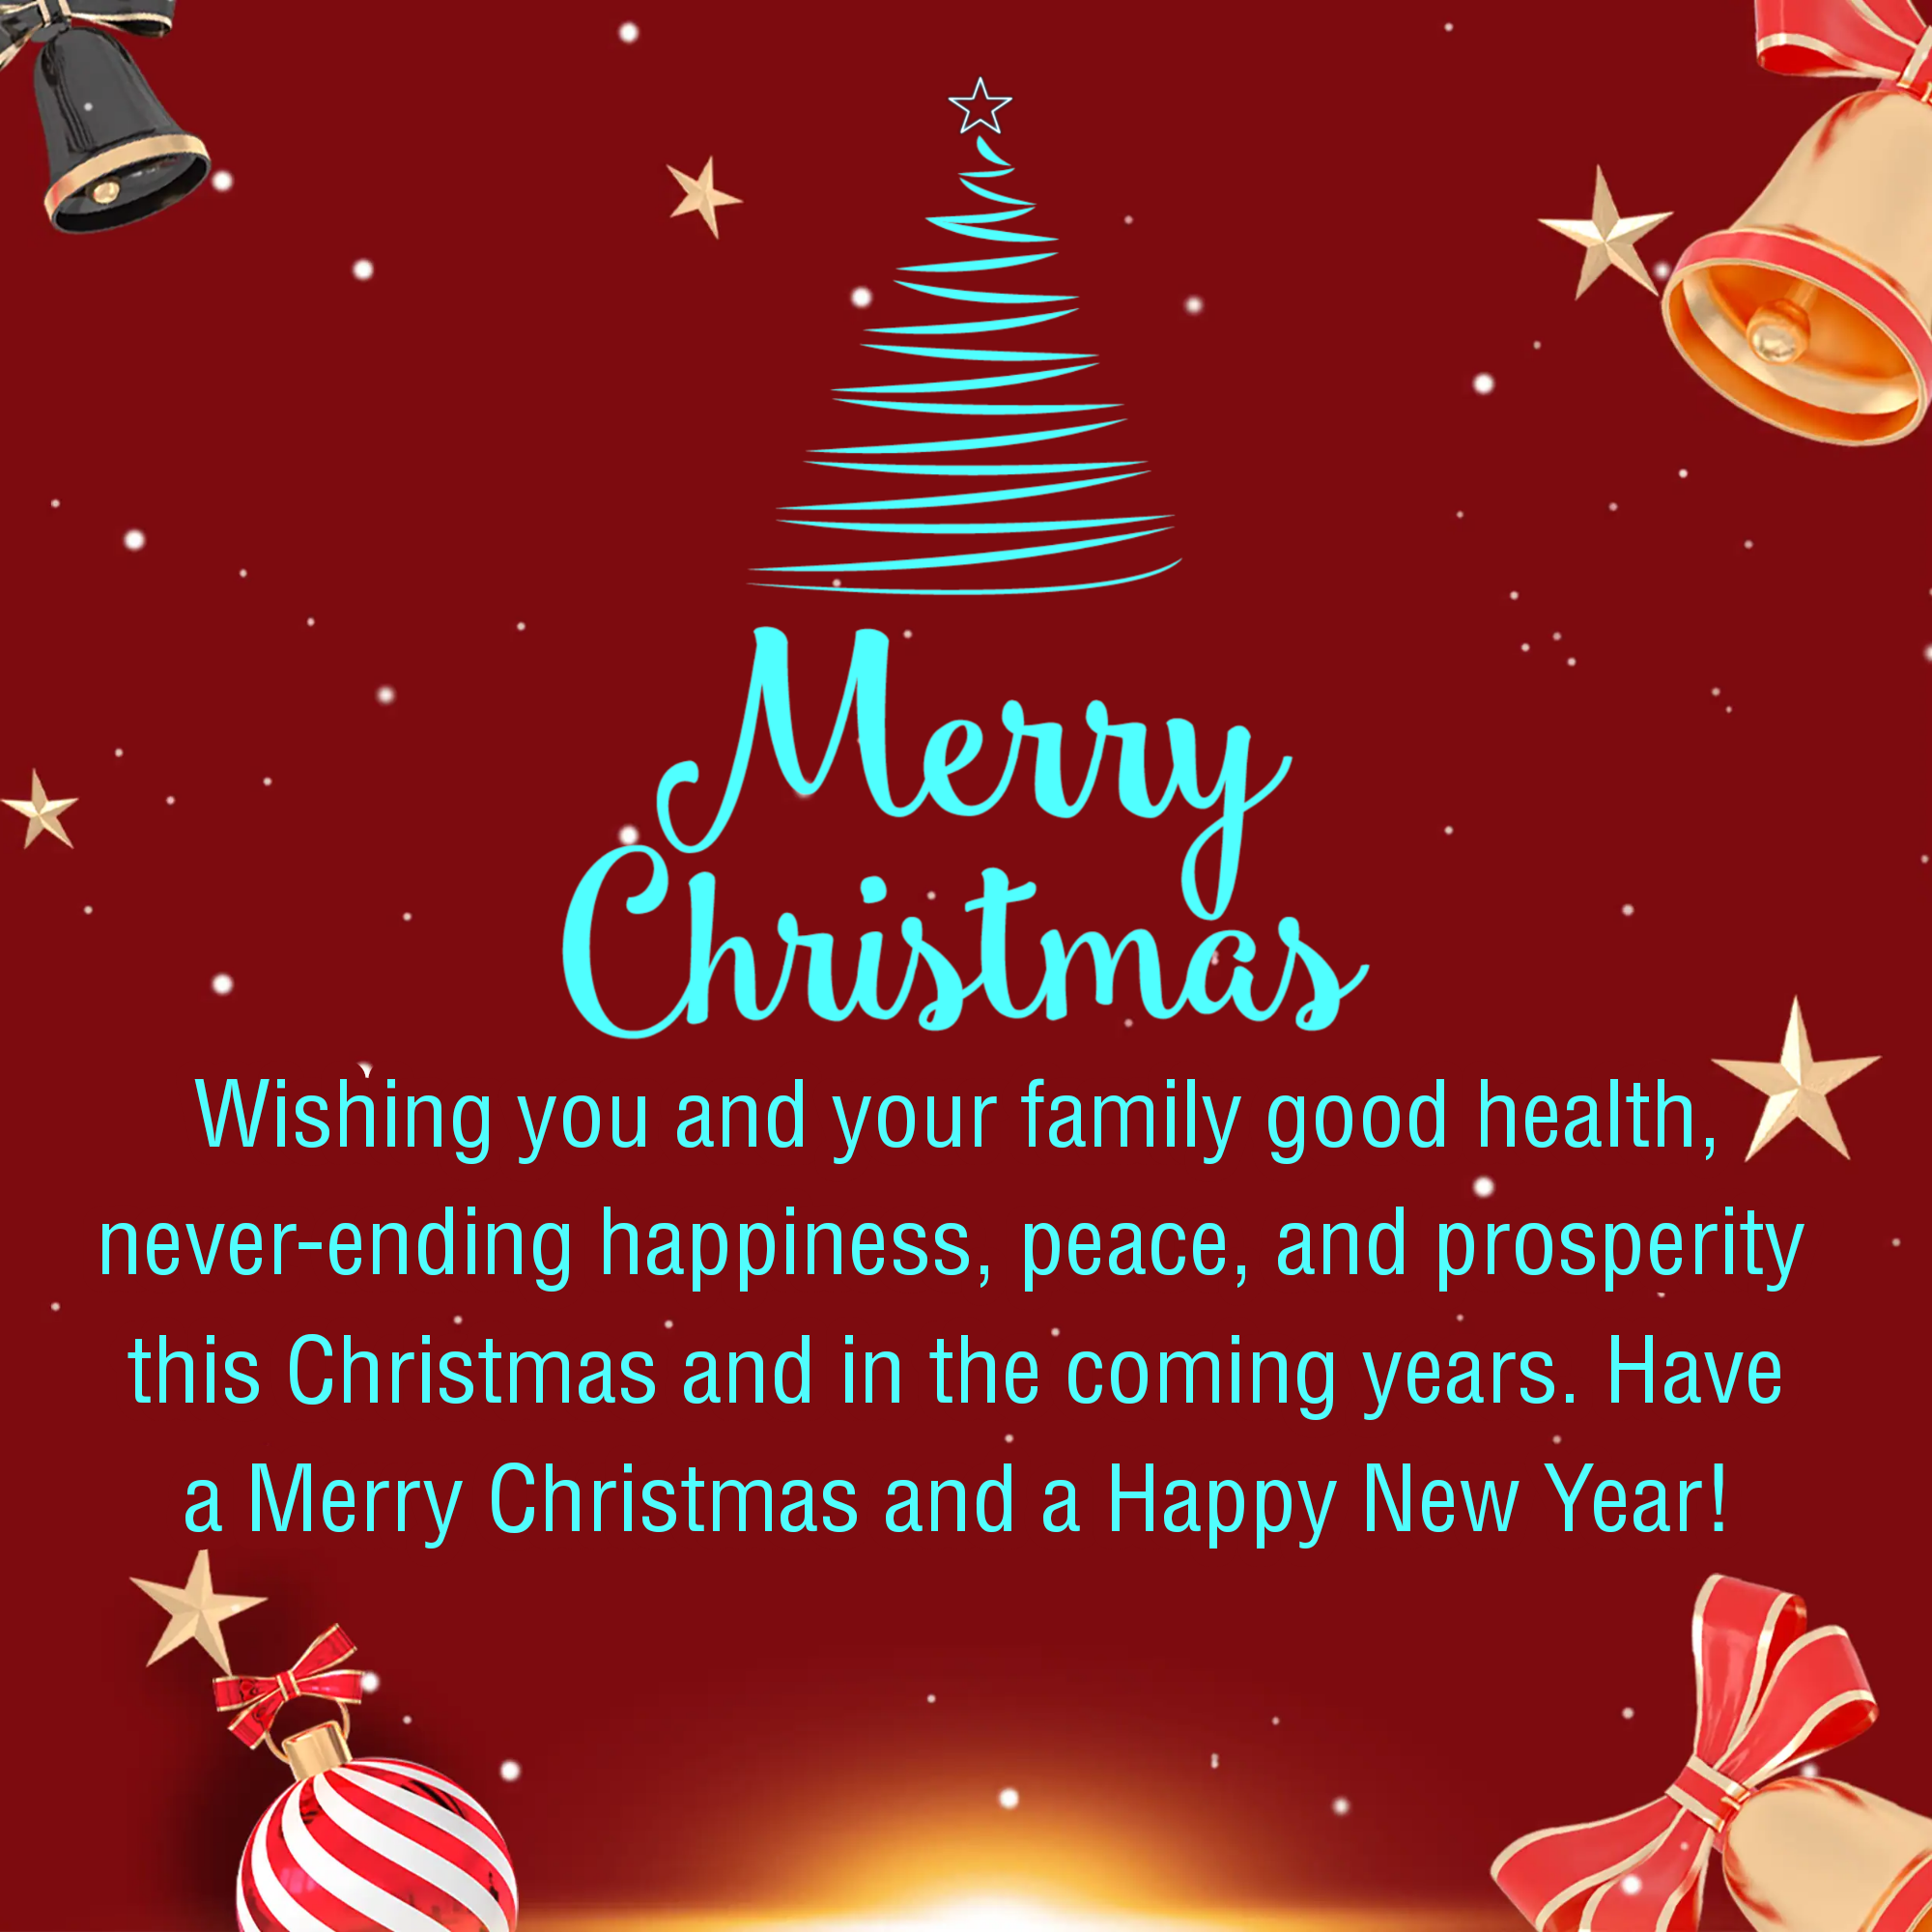 Wishing you and your family good health never-ending happiness